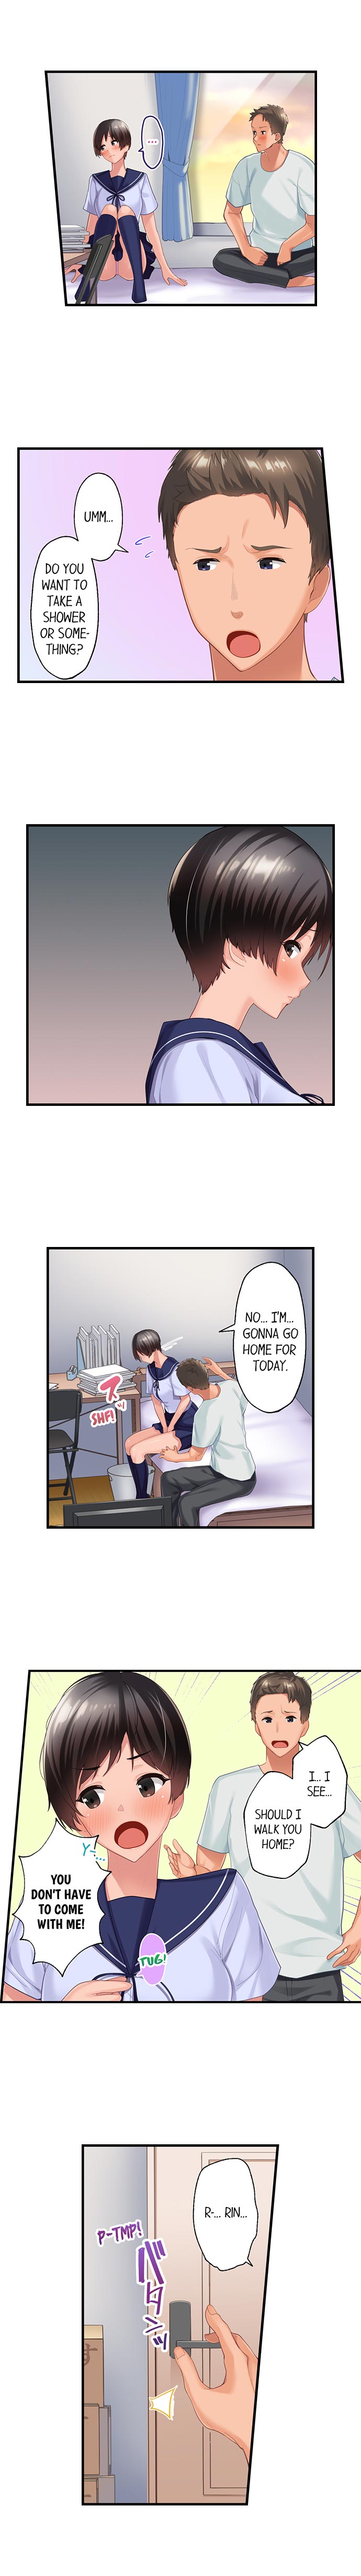 Using 100 Boxes of Condoms With My Childhood Friend! - Chapter 4 Page 2